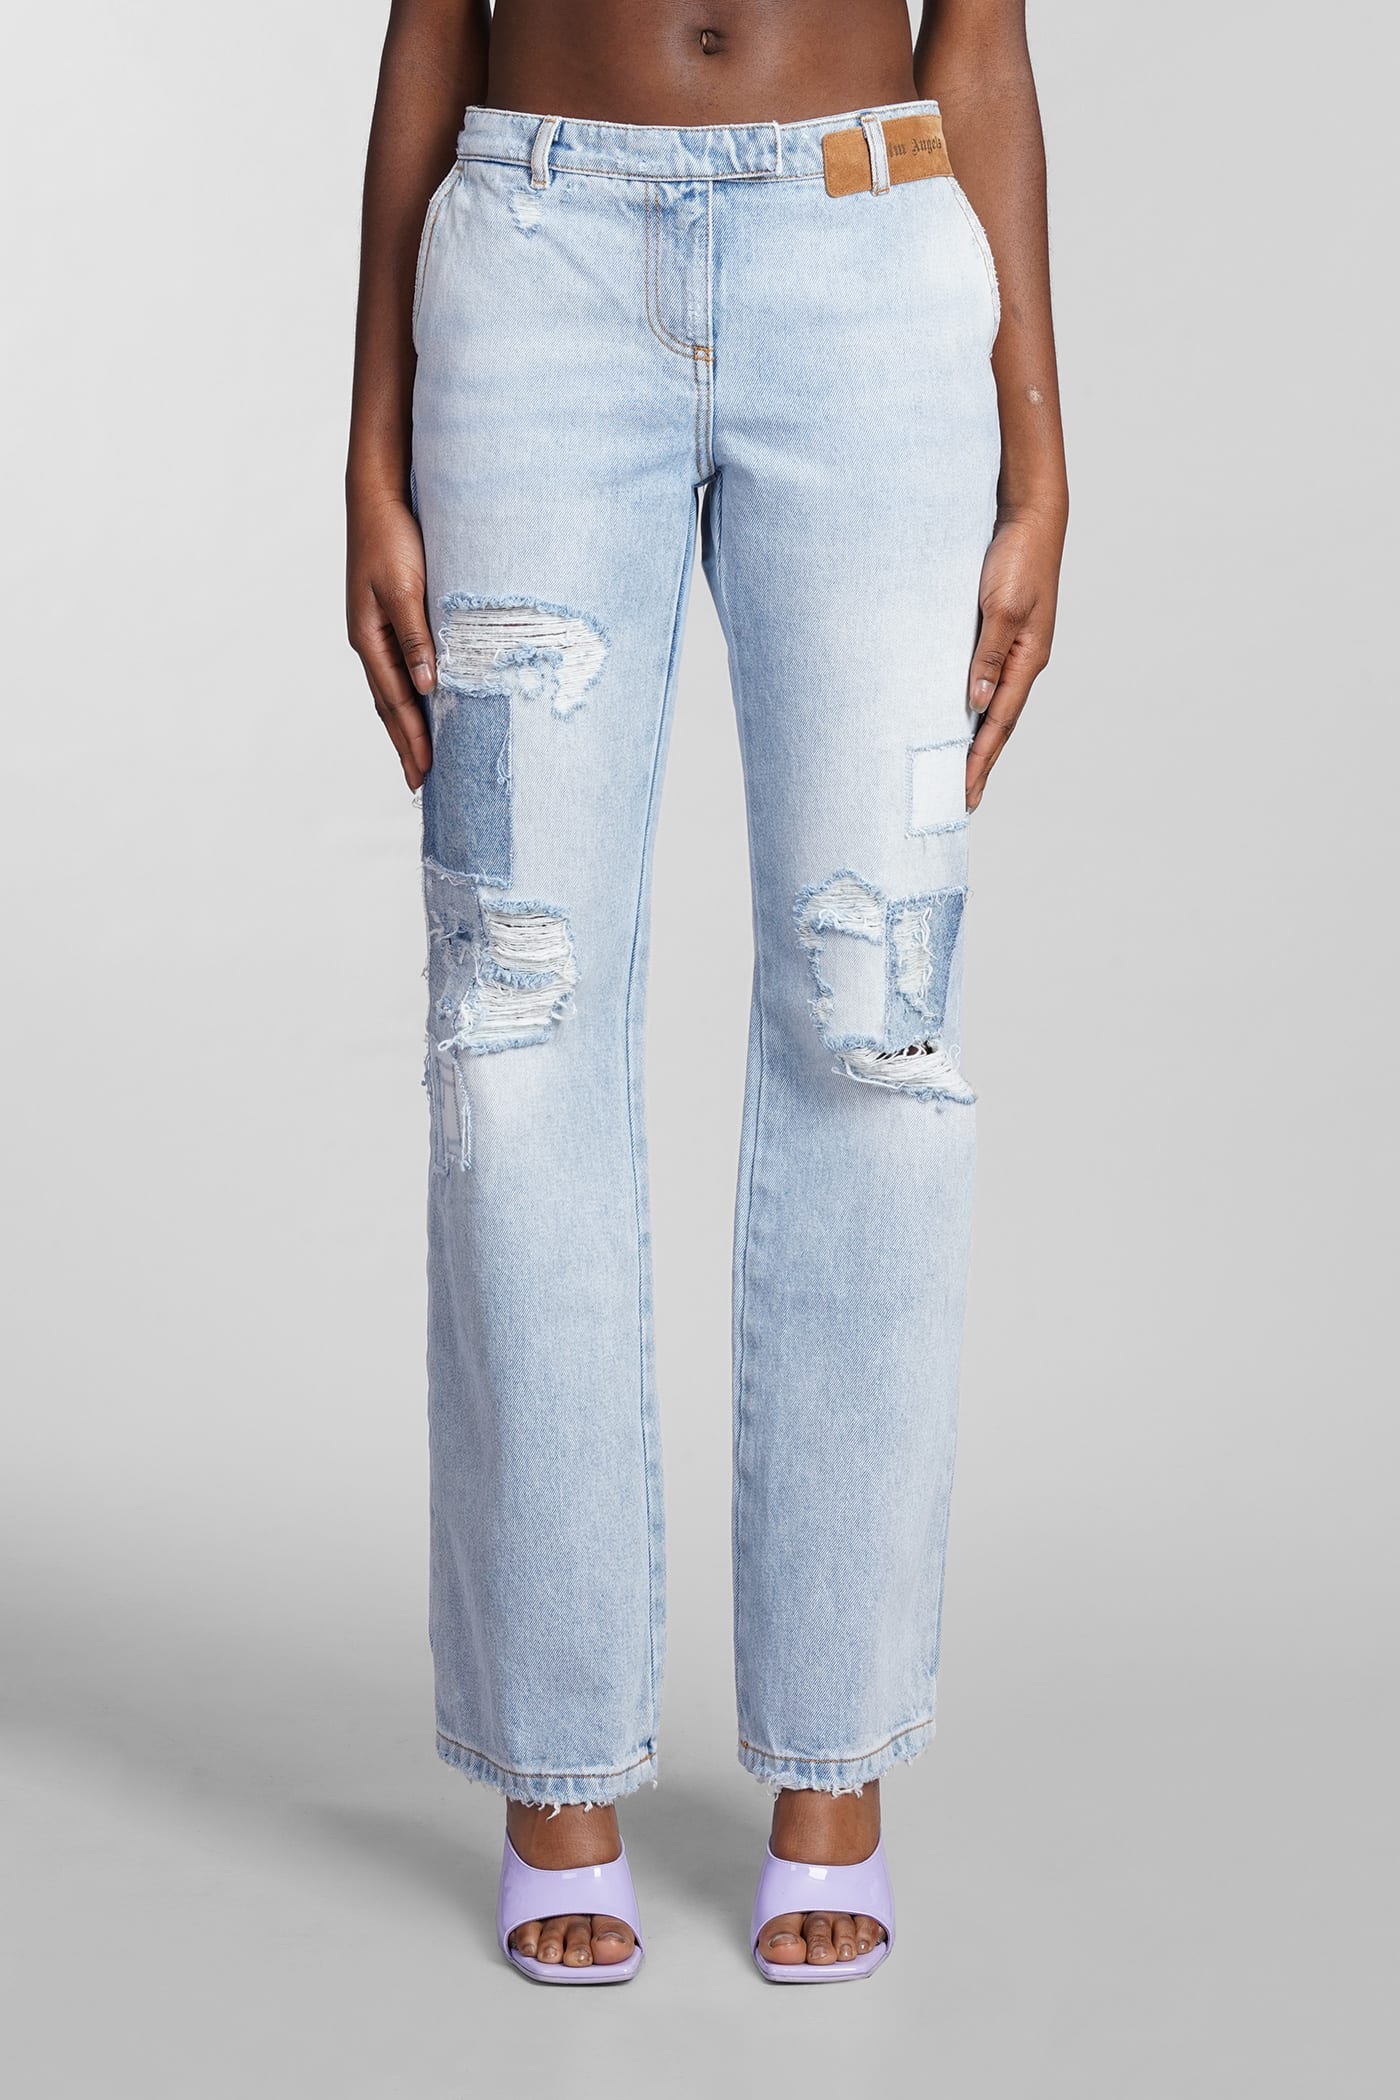 PALM ANGELS JEANS IN BLUE DENIM